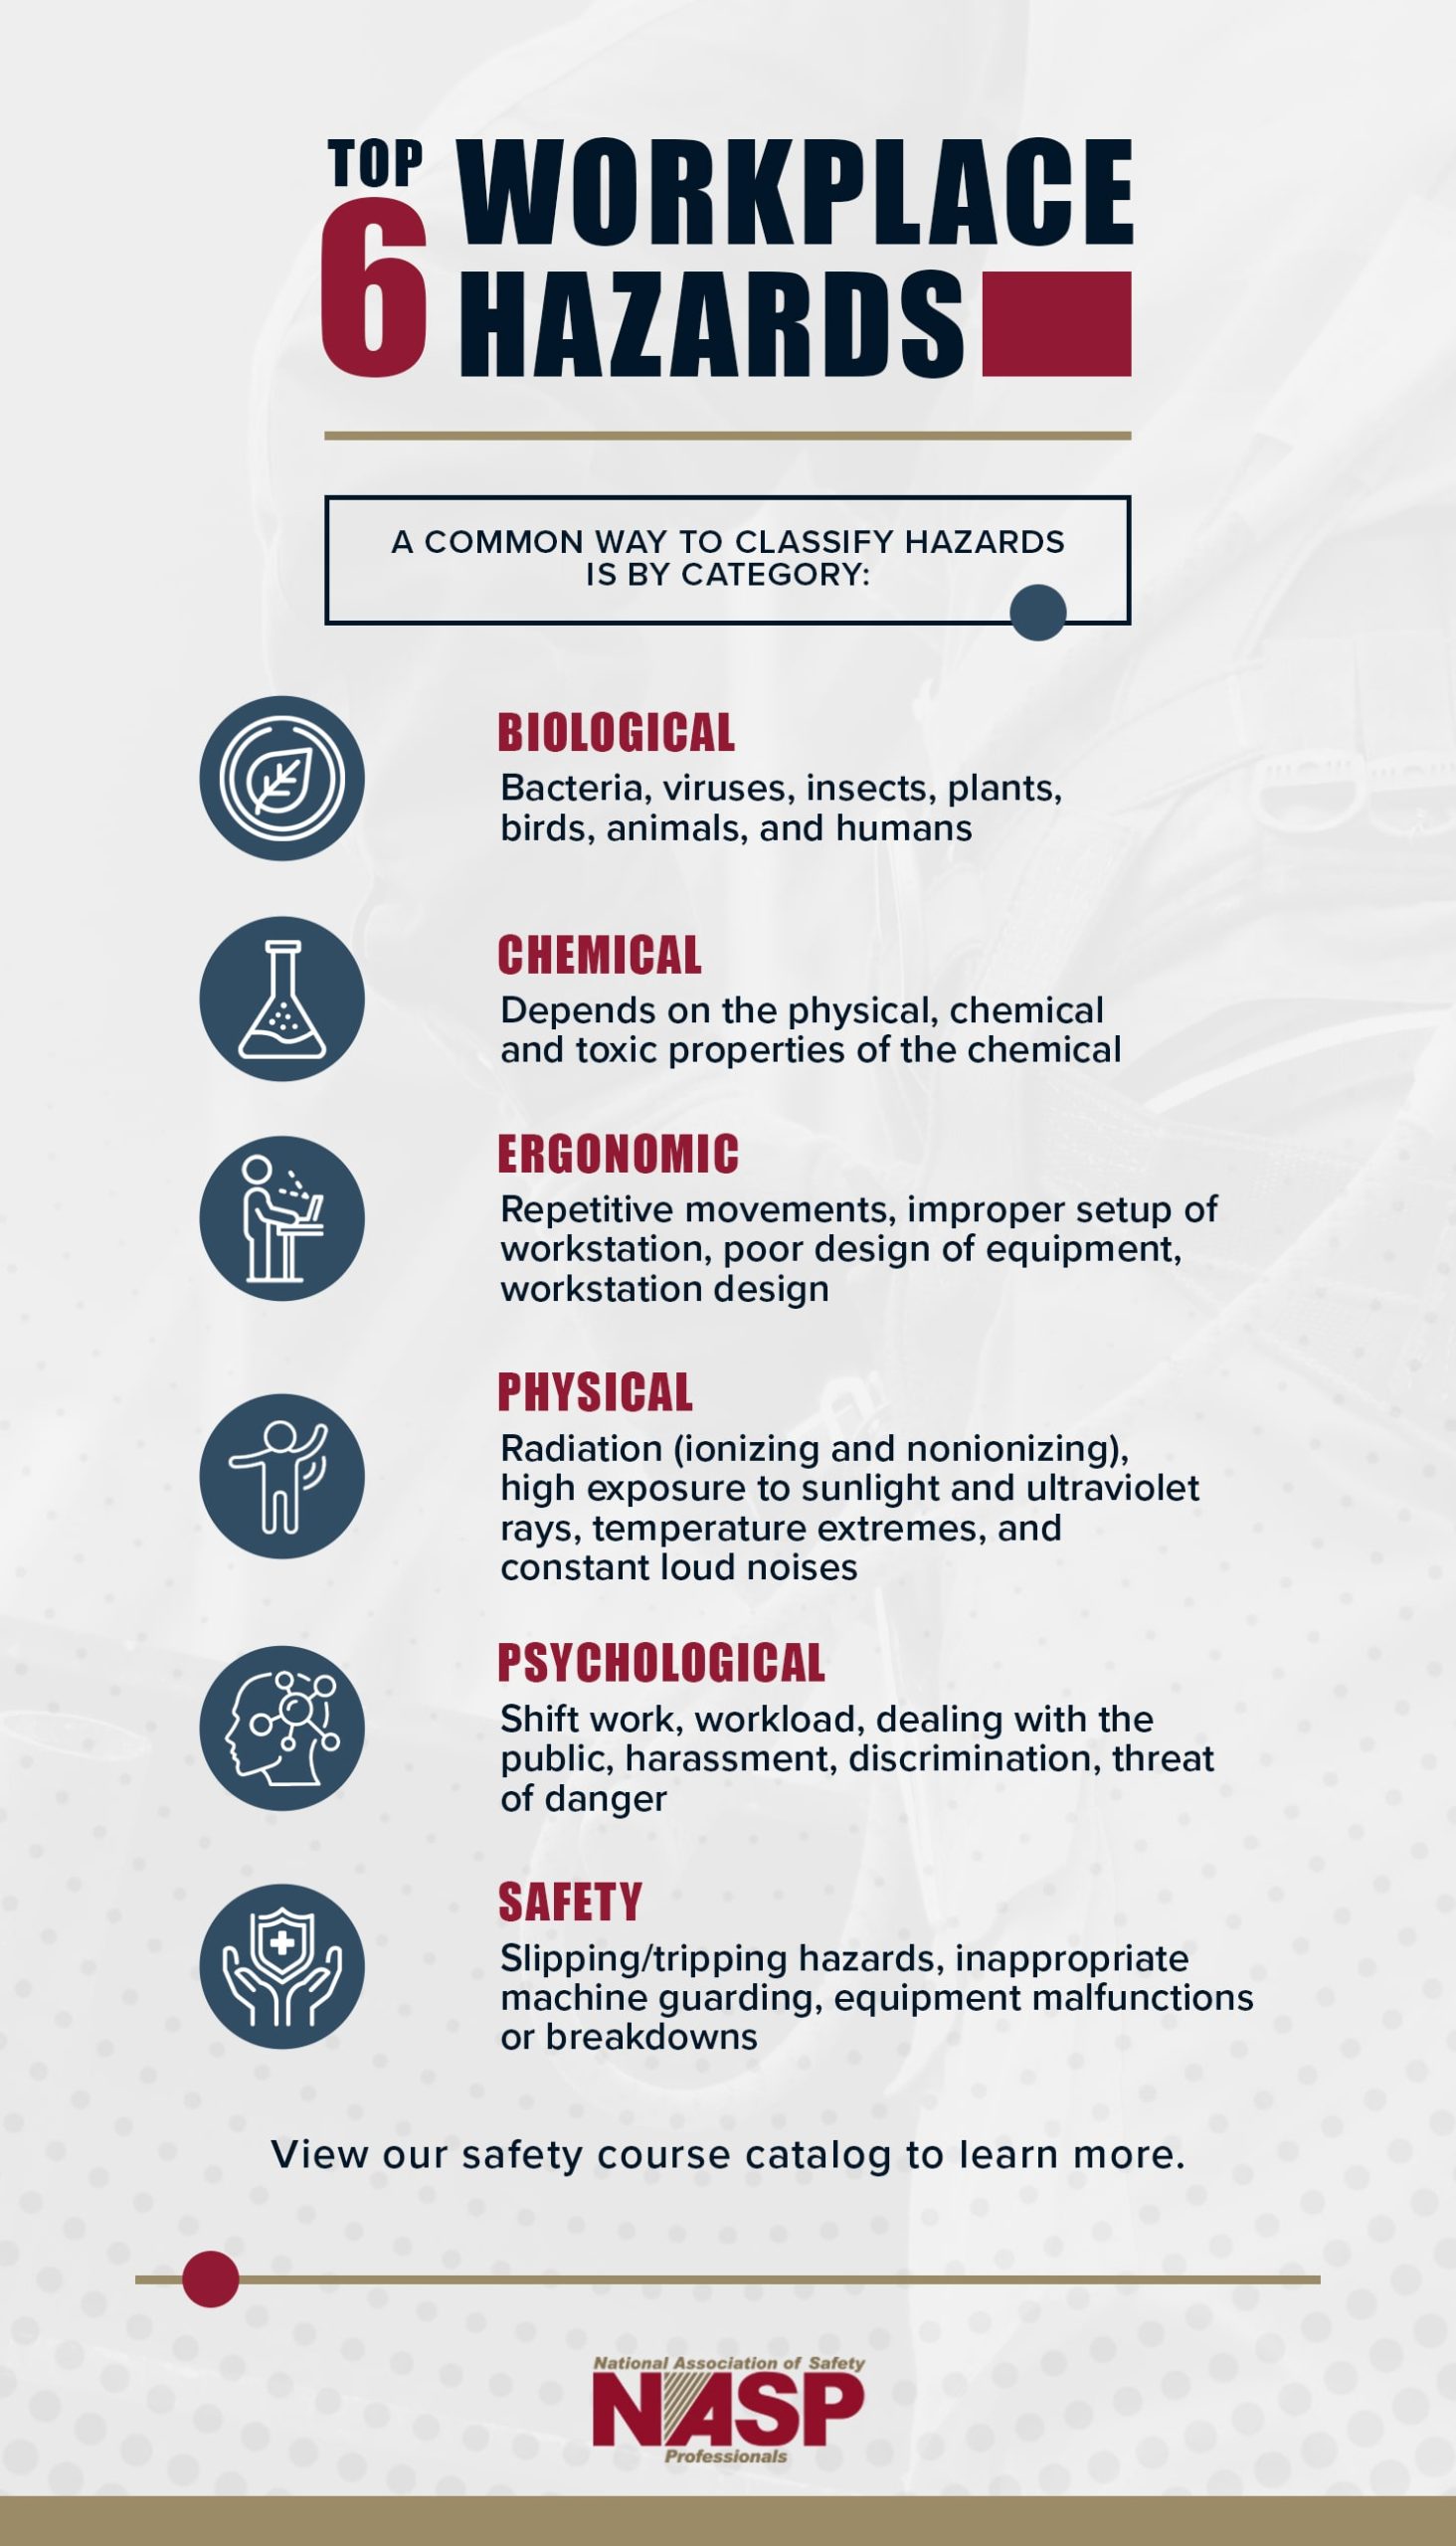 Types of Hazards | National Association of Safety Professionals